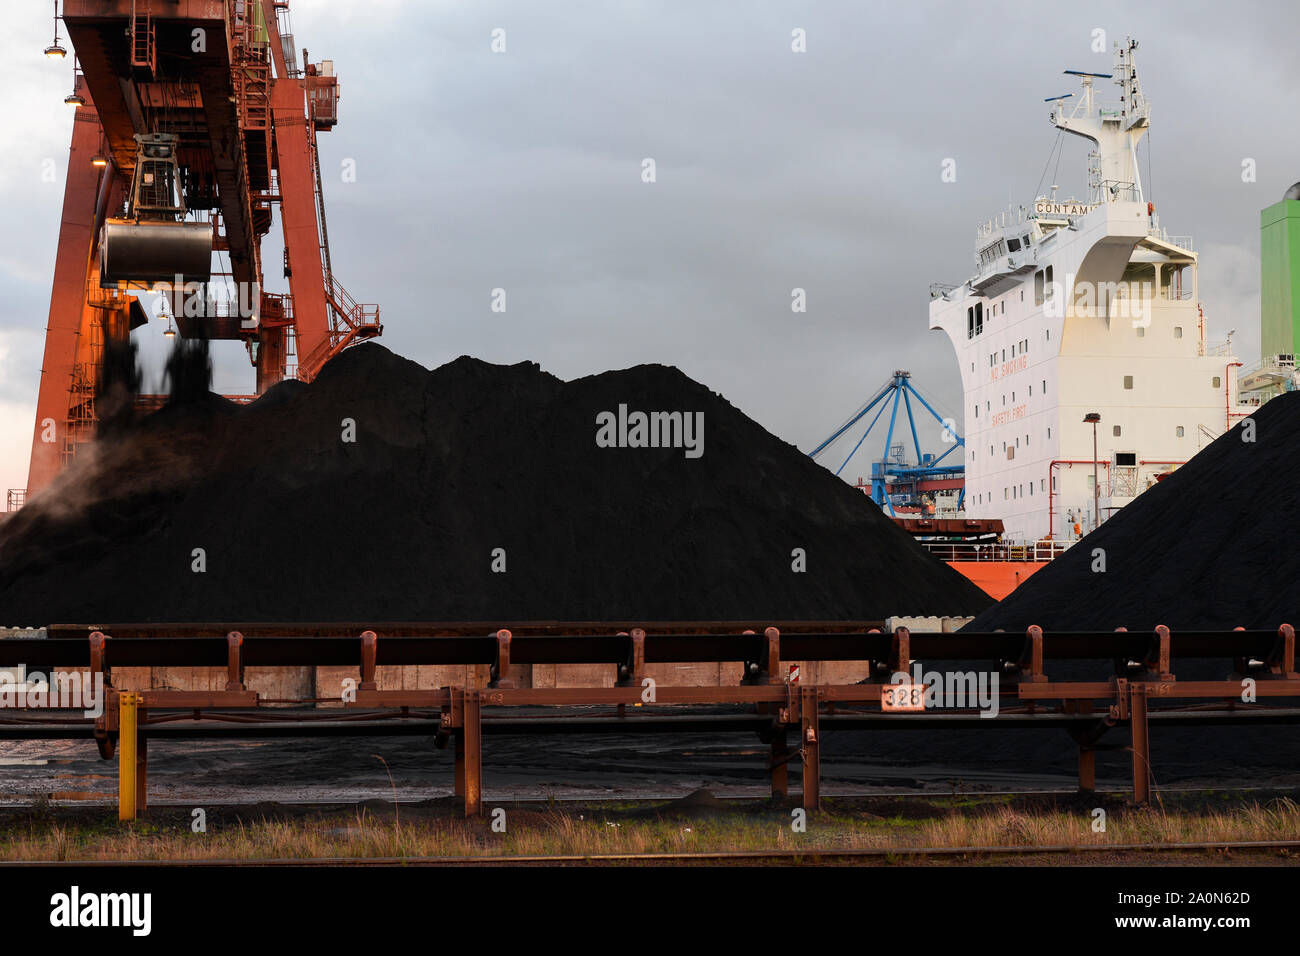 Germany, Hamburg, Hansaport import of coal and ore, unloading of cannadian coal from vessel Contamines with large excavator shovel / DEUTSCHLAND, Hamburg, Hansaport, Import von Kohle und Erz, Entladung von kannadischer Kohle vom Schiff Contamines Stock Photo